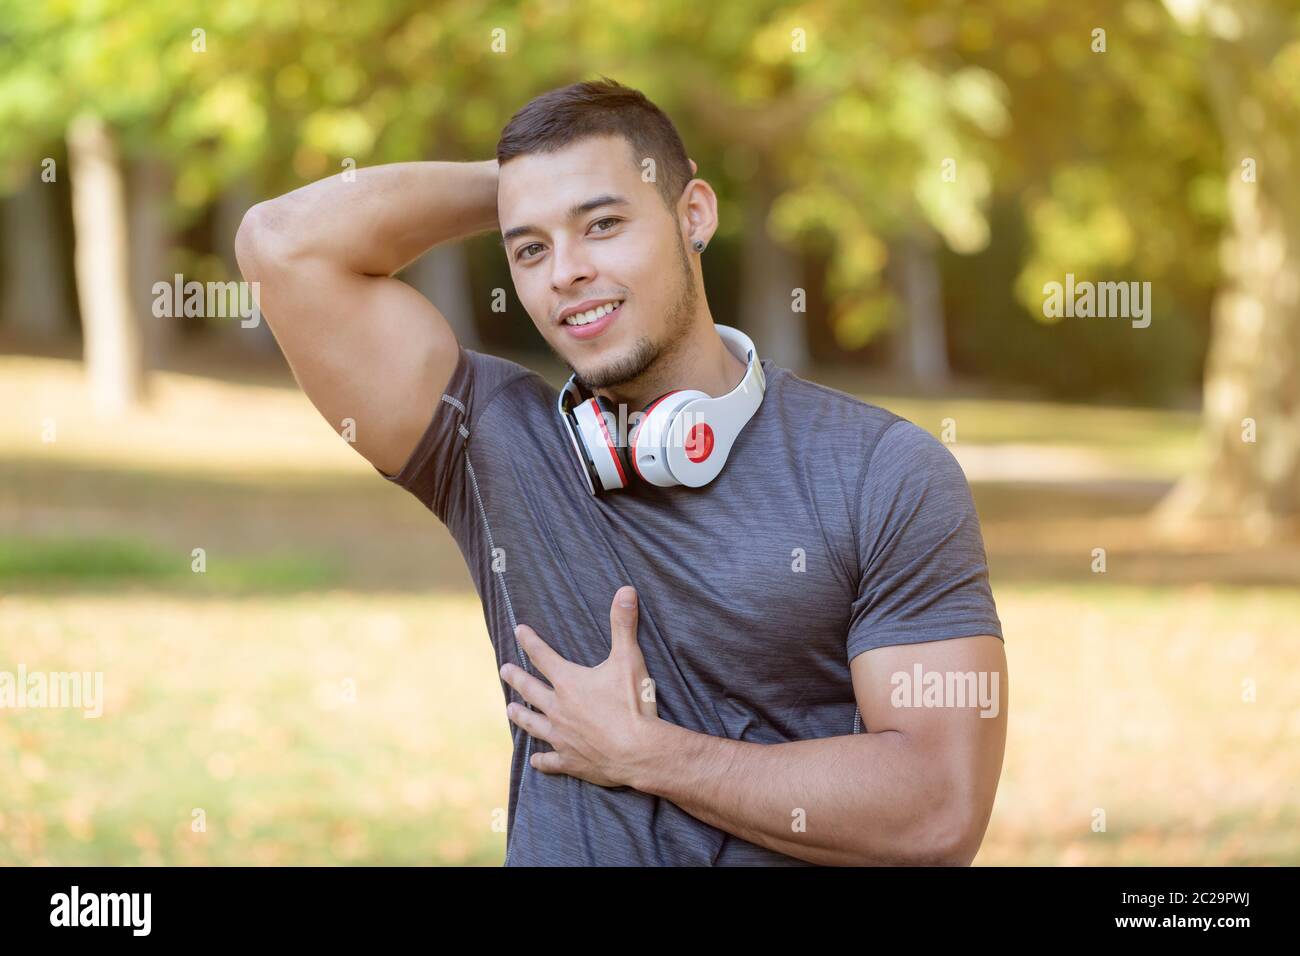 Flexing muscles posing runner young latin man running jogging sports training fitness workout copyspace copy space outdoor Stock Photo